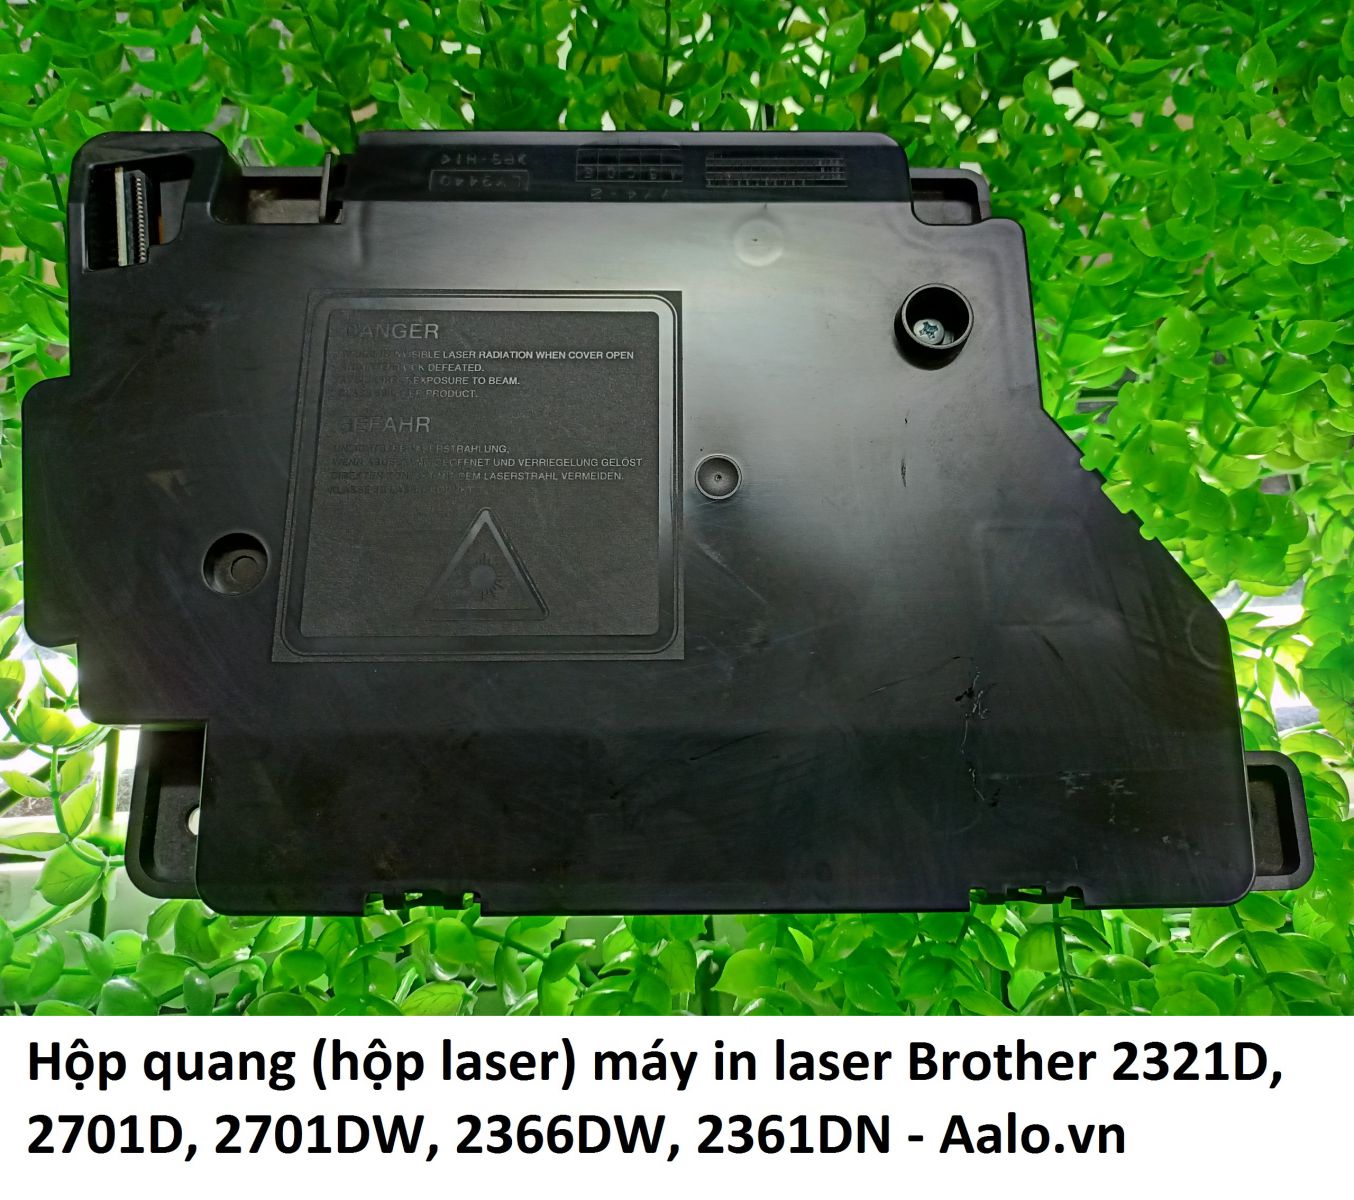 Hộp quang (hộp laser) máy in laser Brother 2321D, 2701D, 2701DW, 2366DW, 2361DN - Aalo.vn